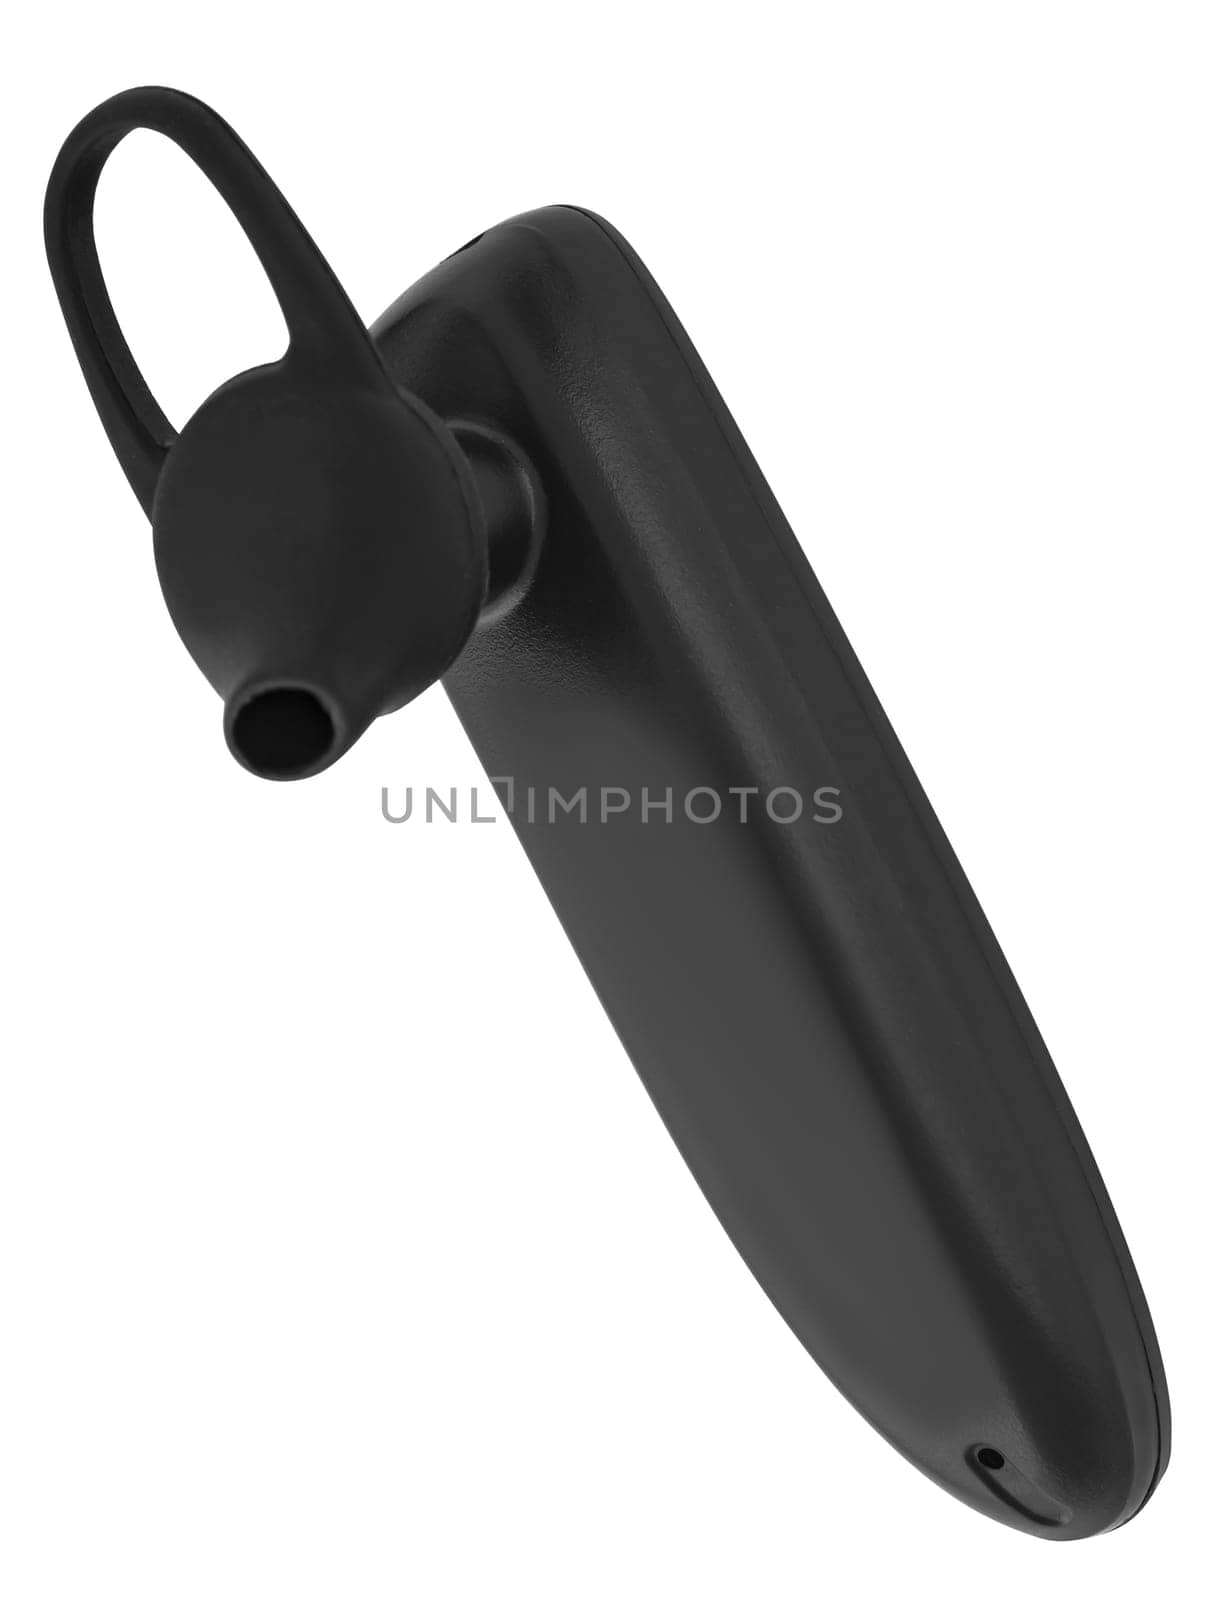 Wireless headset, phone accessory on white background in isolation